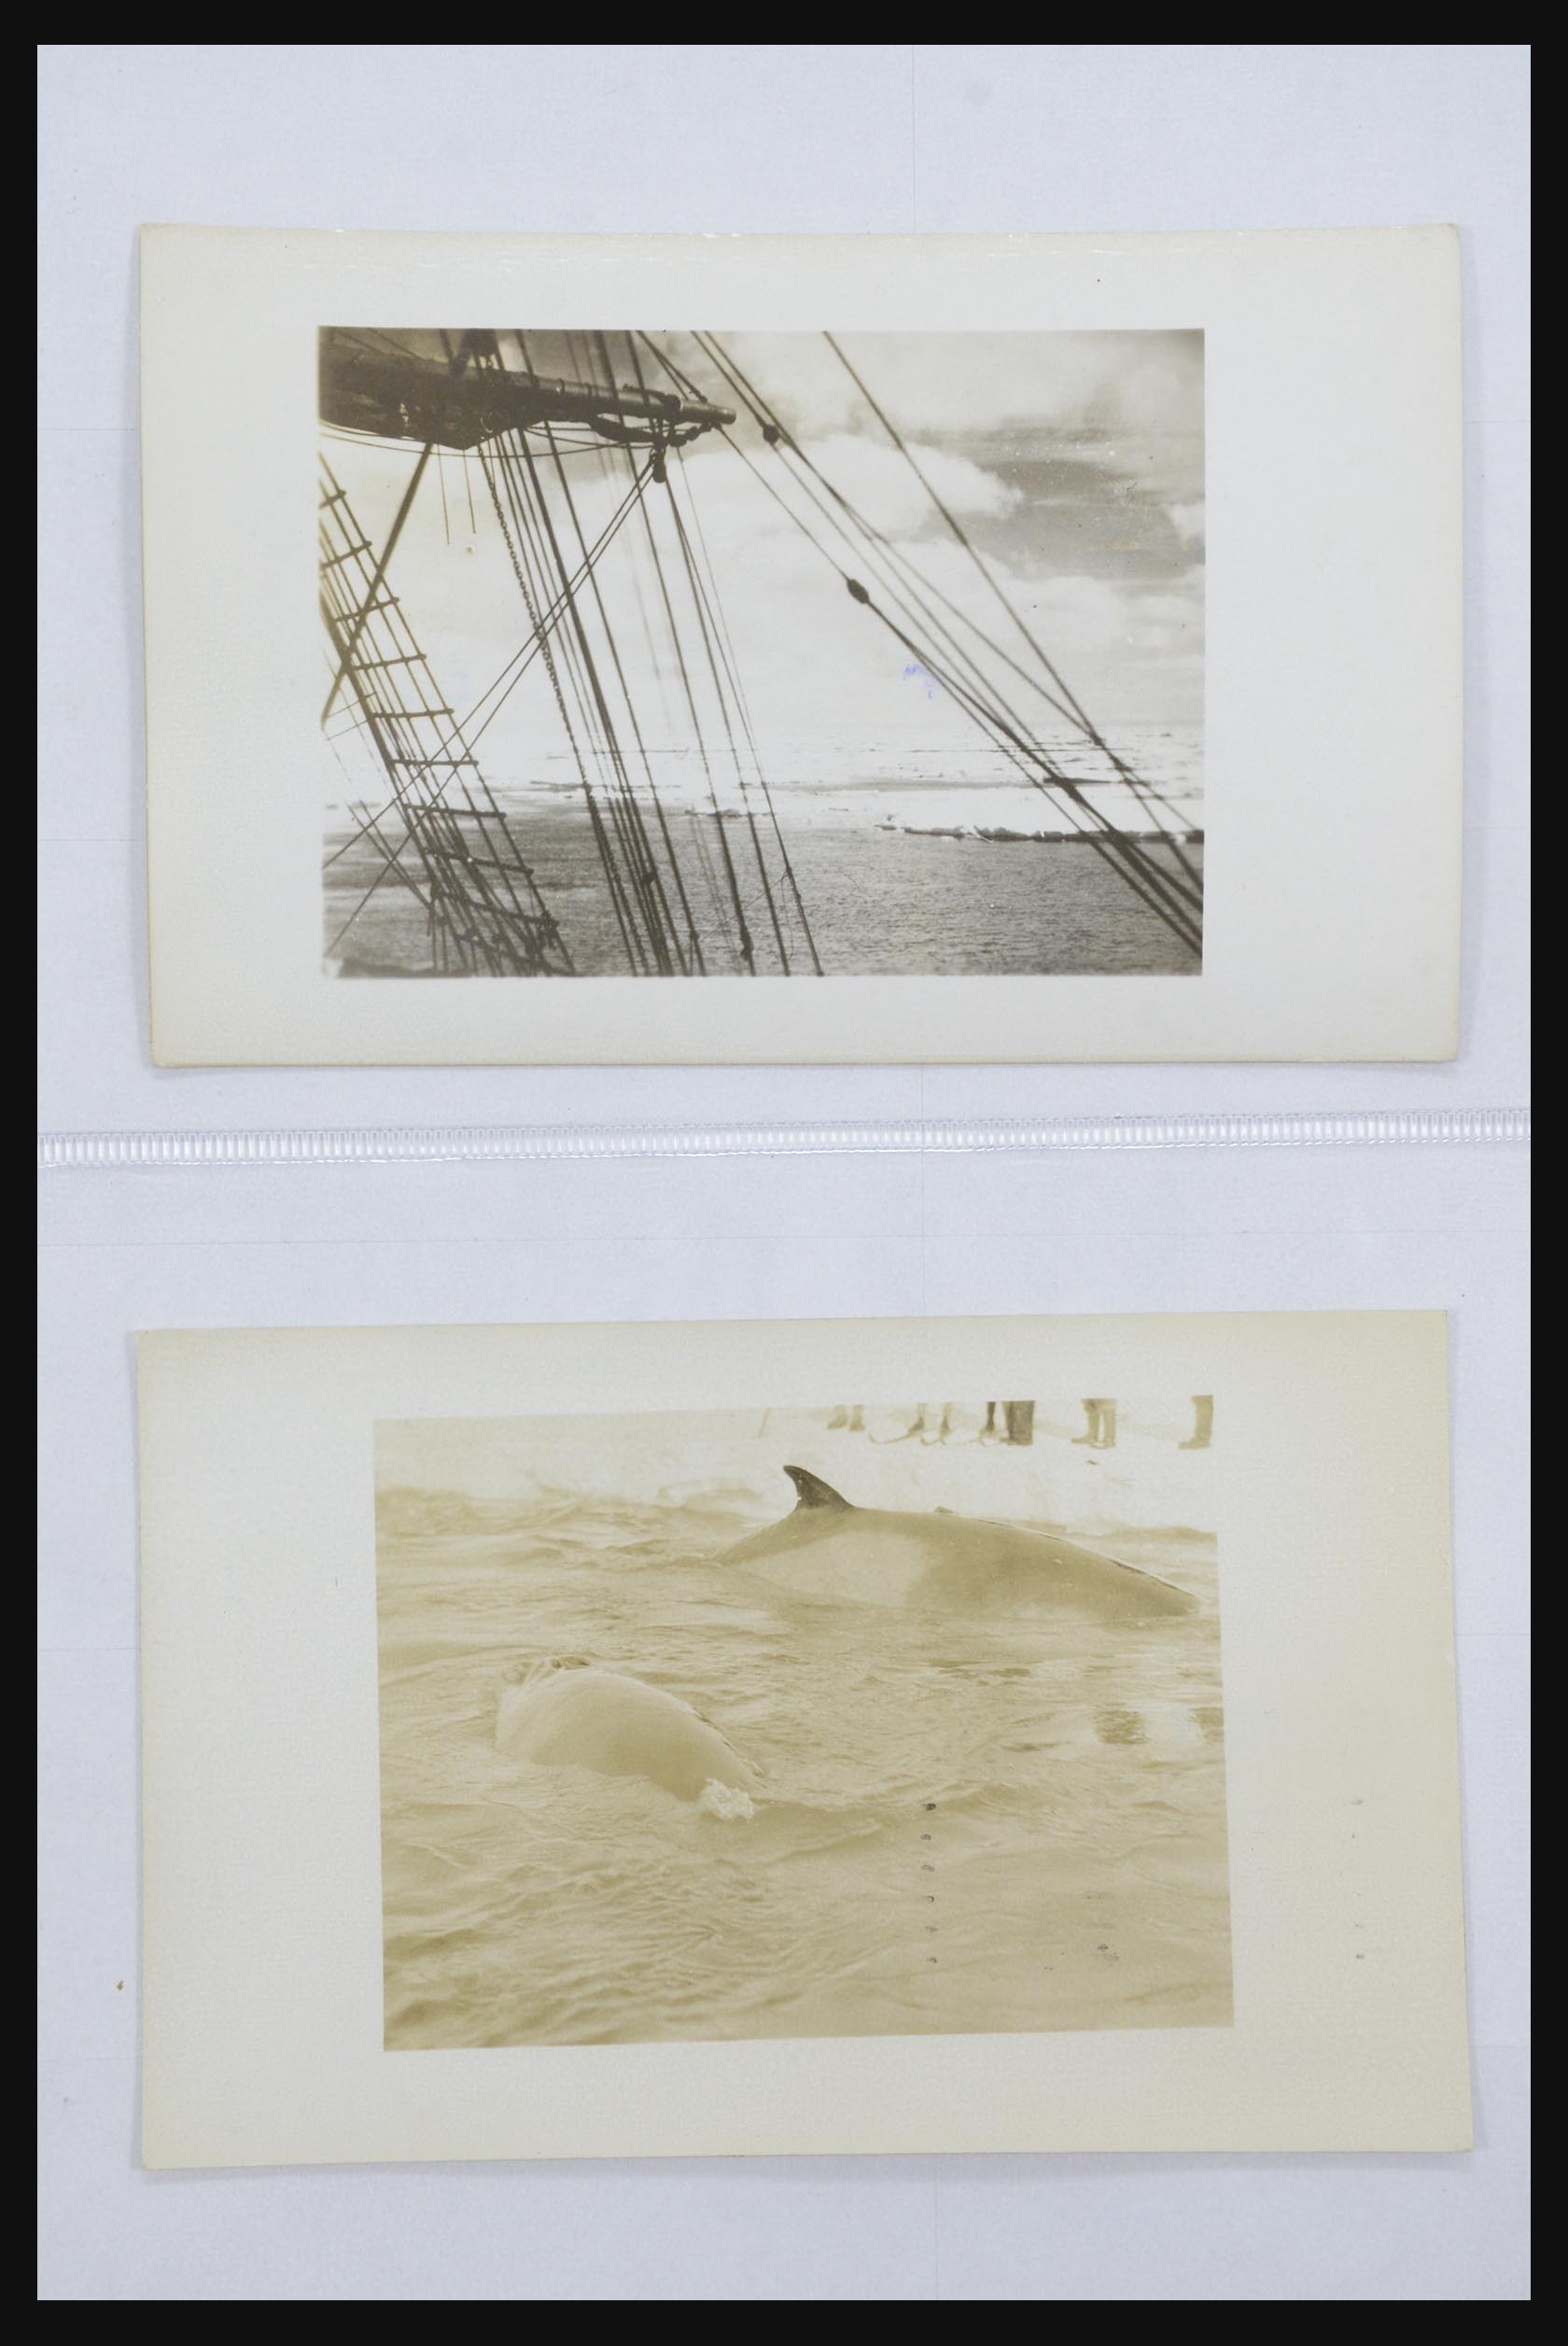 31627 015 - 31627 Byrd Antarctic Expedition 1934.